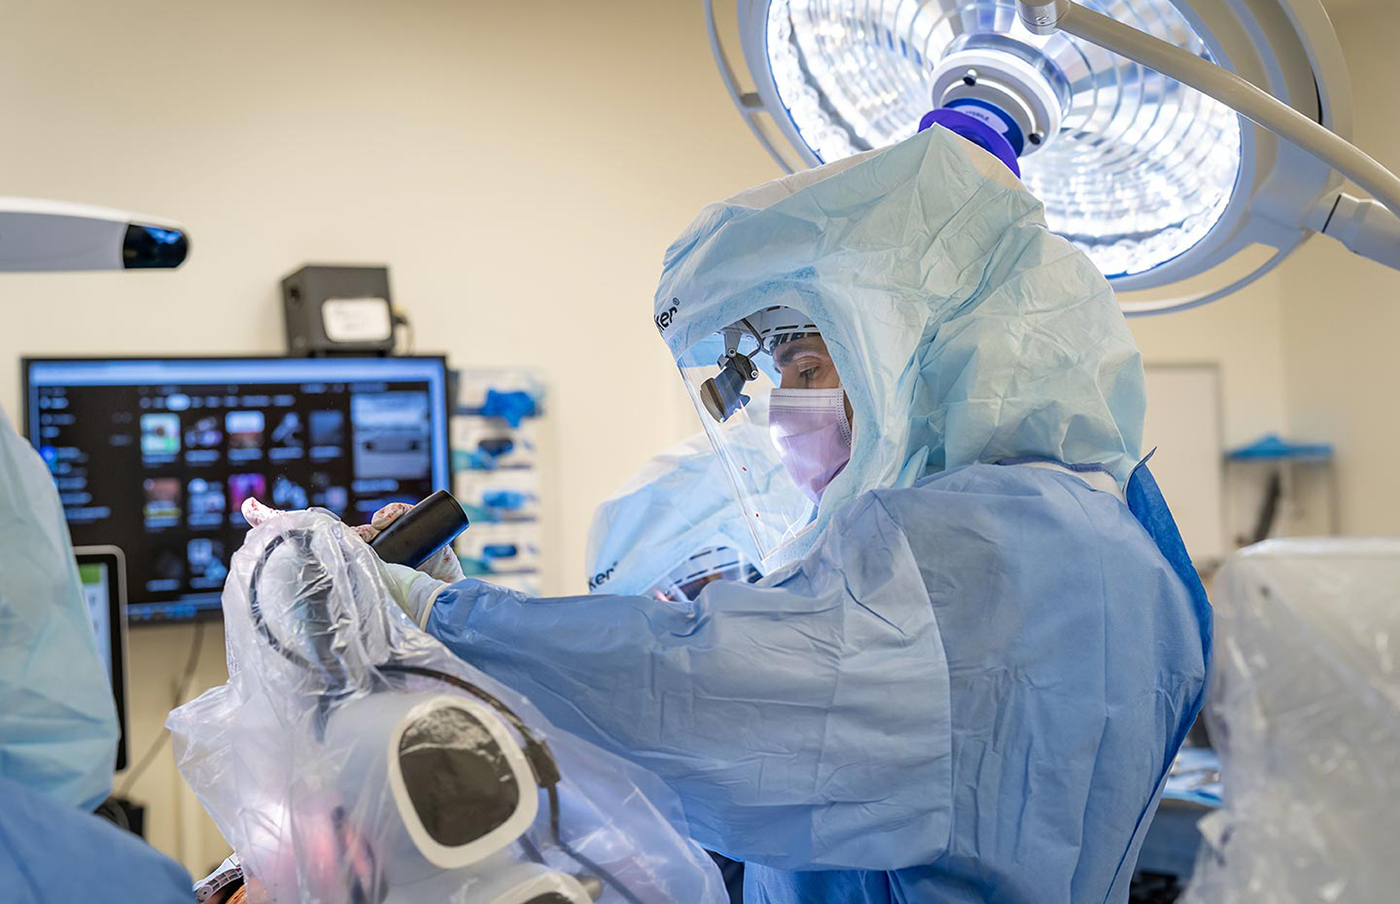 Surgeon Wayne Moschetti using a new robotic-assisted surgical tool manufactured by VELYS during a knee joint replacement surgery.